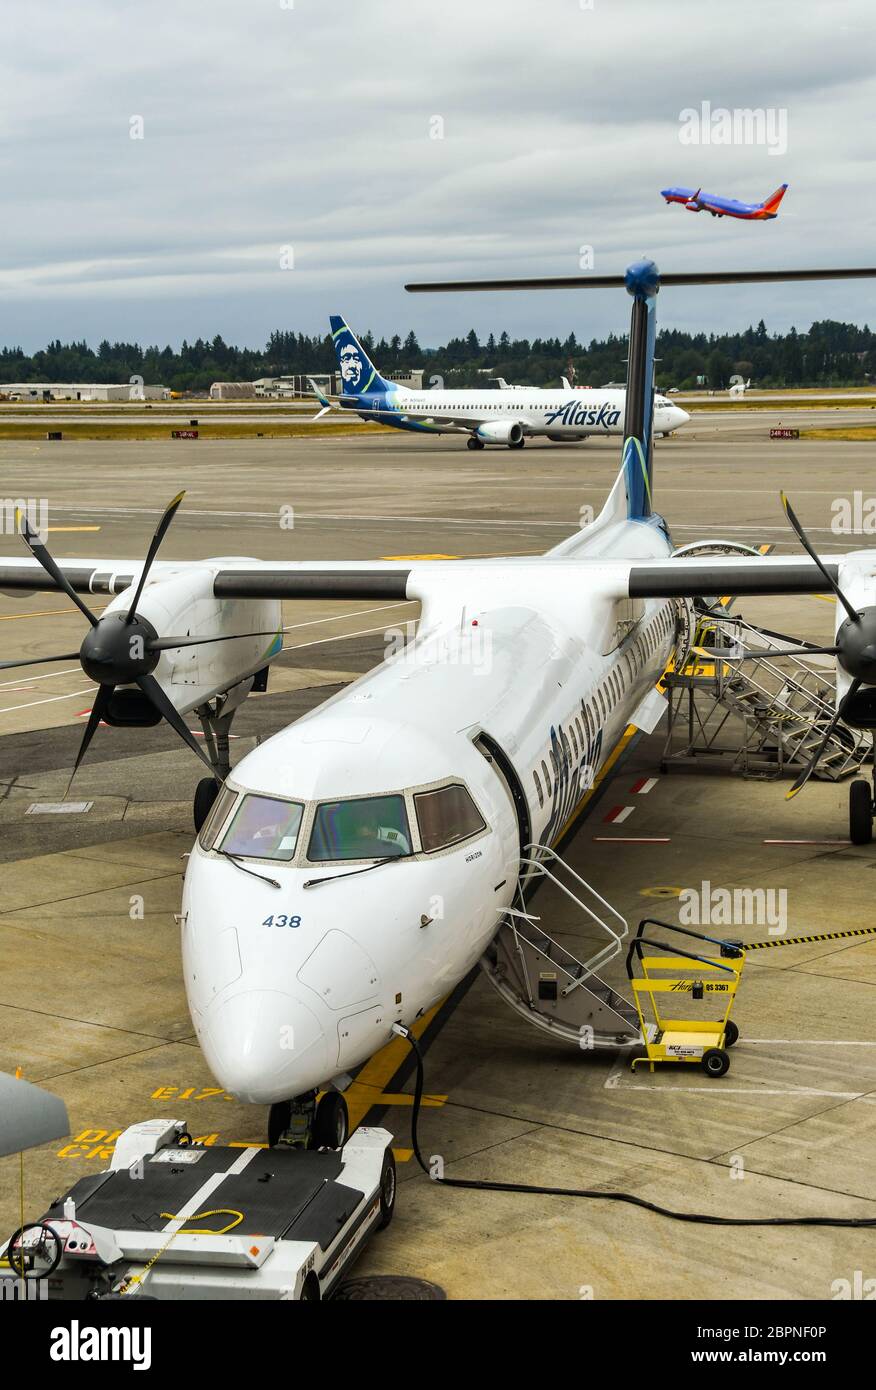 SEATTLE TACOMA AIRPORT, WA, USA - JUNE 2018: Horizon Air De Havilland DHC8 400 turboprop plane operated for Alaska Airlines Stock Photo